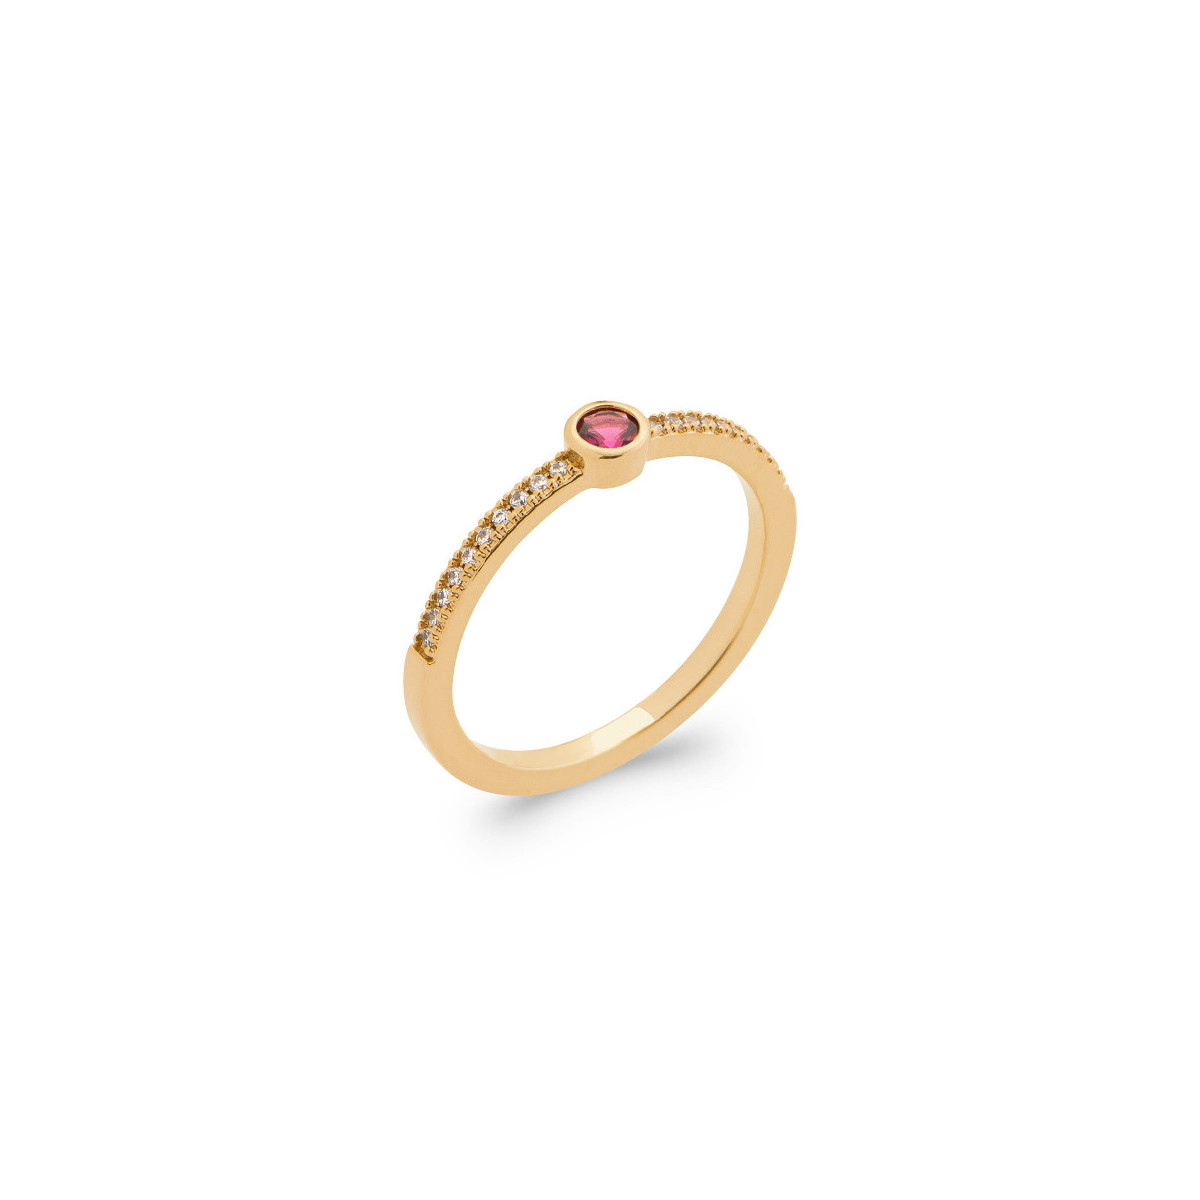 GOLD PLATED SILVER RING WITH BICOLOUR ZIRCONIAS